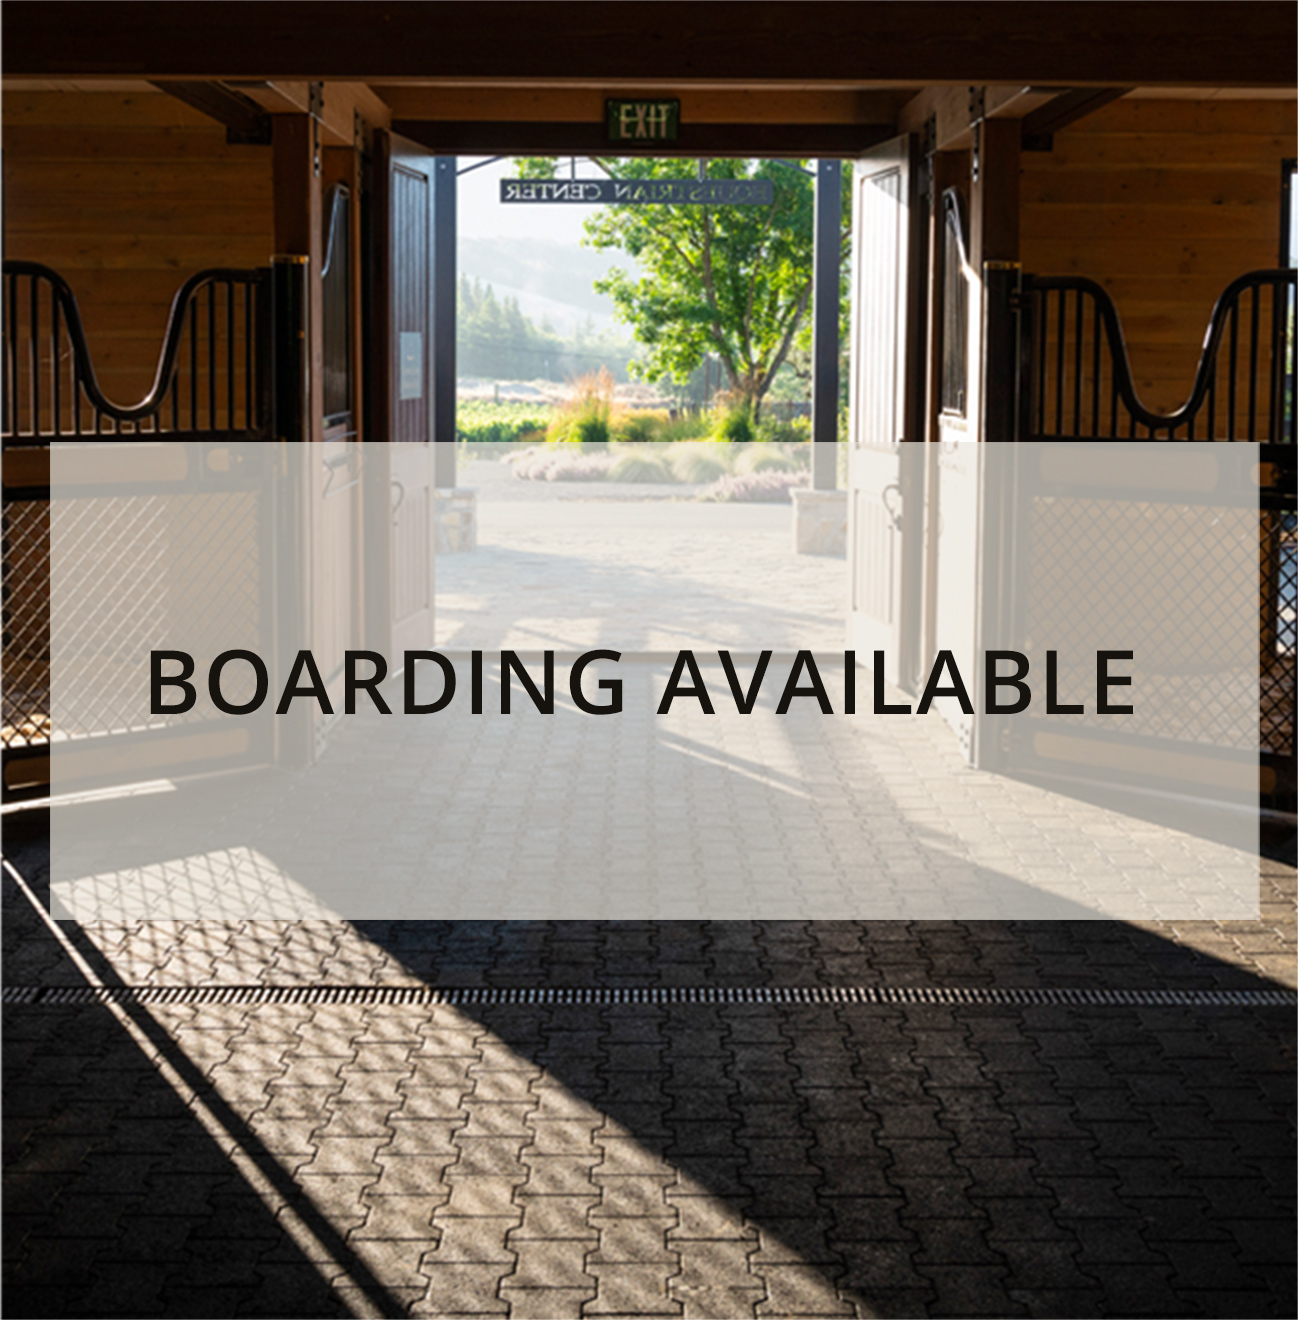 Boarding Available